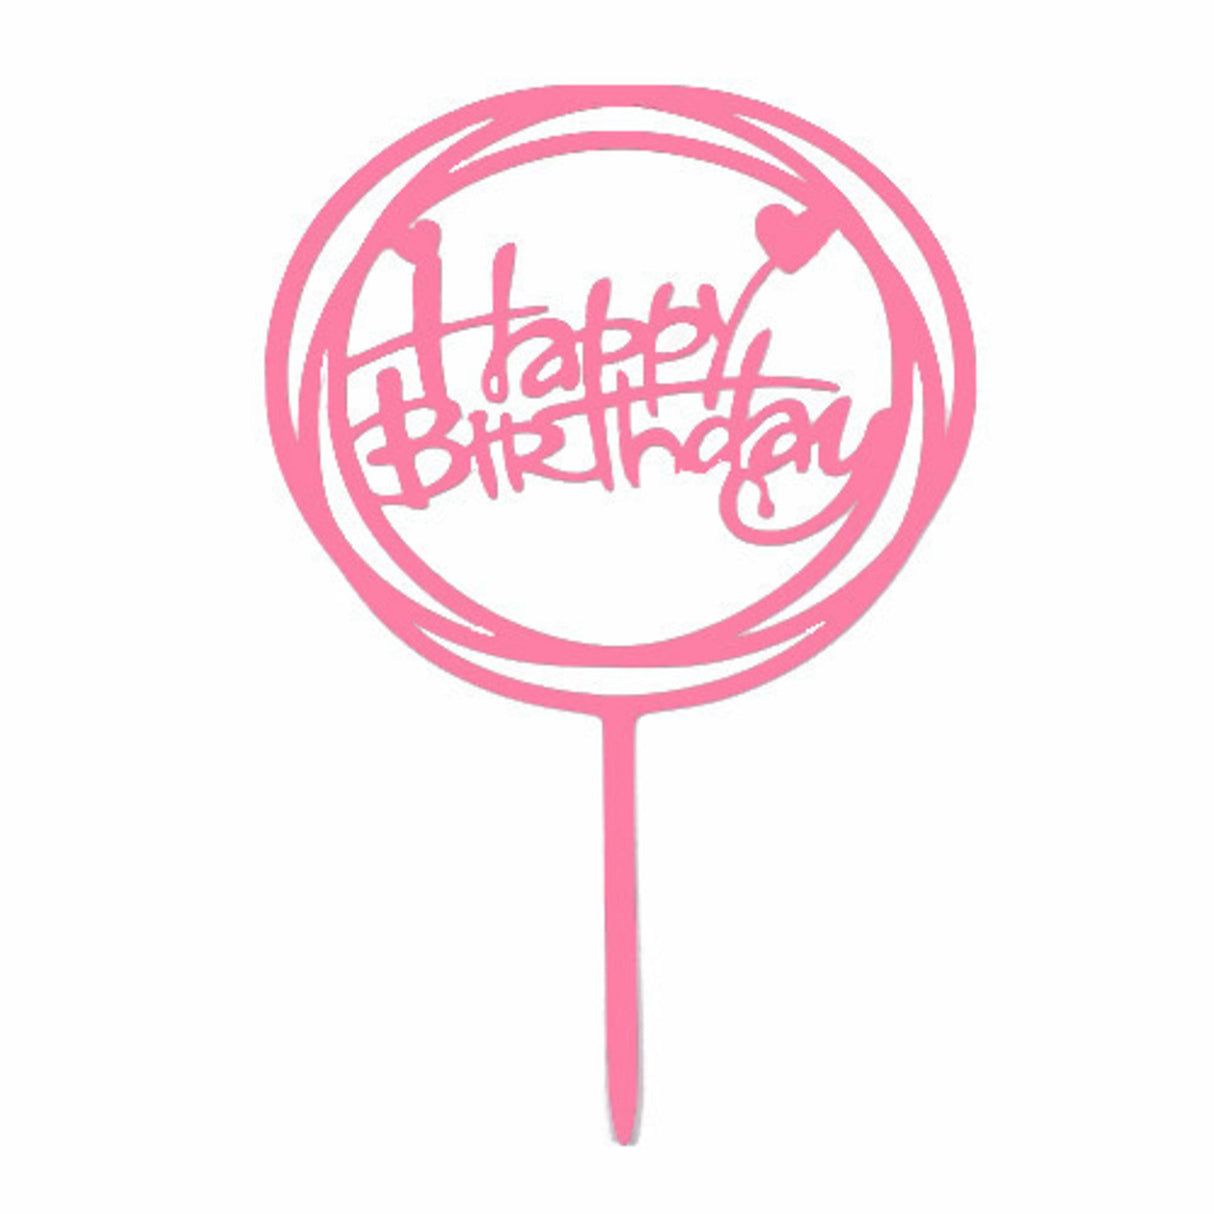 "Happy Birthday" Pink Heart Topper Pic (160x100mm)